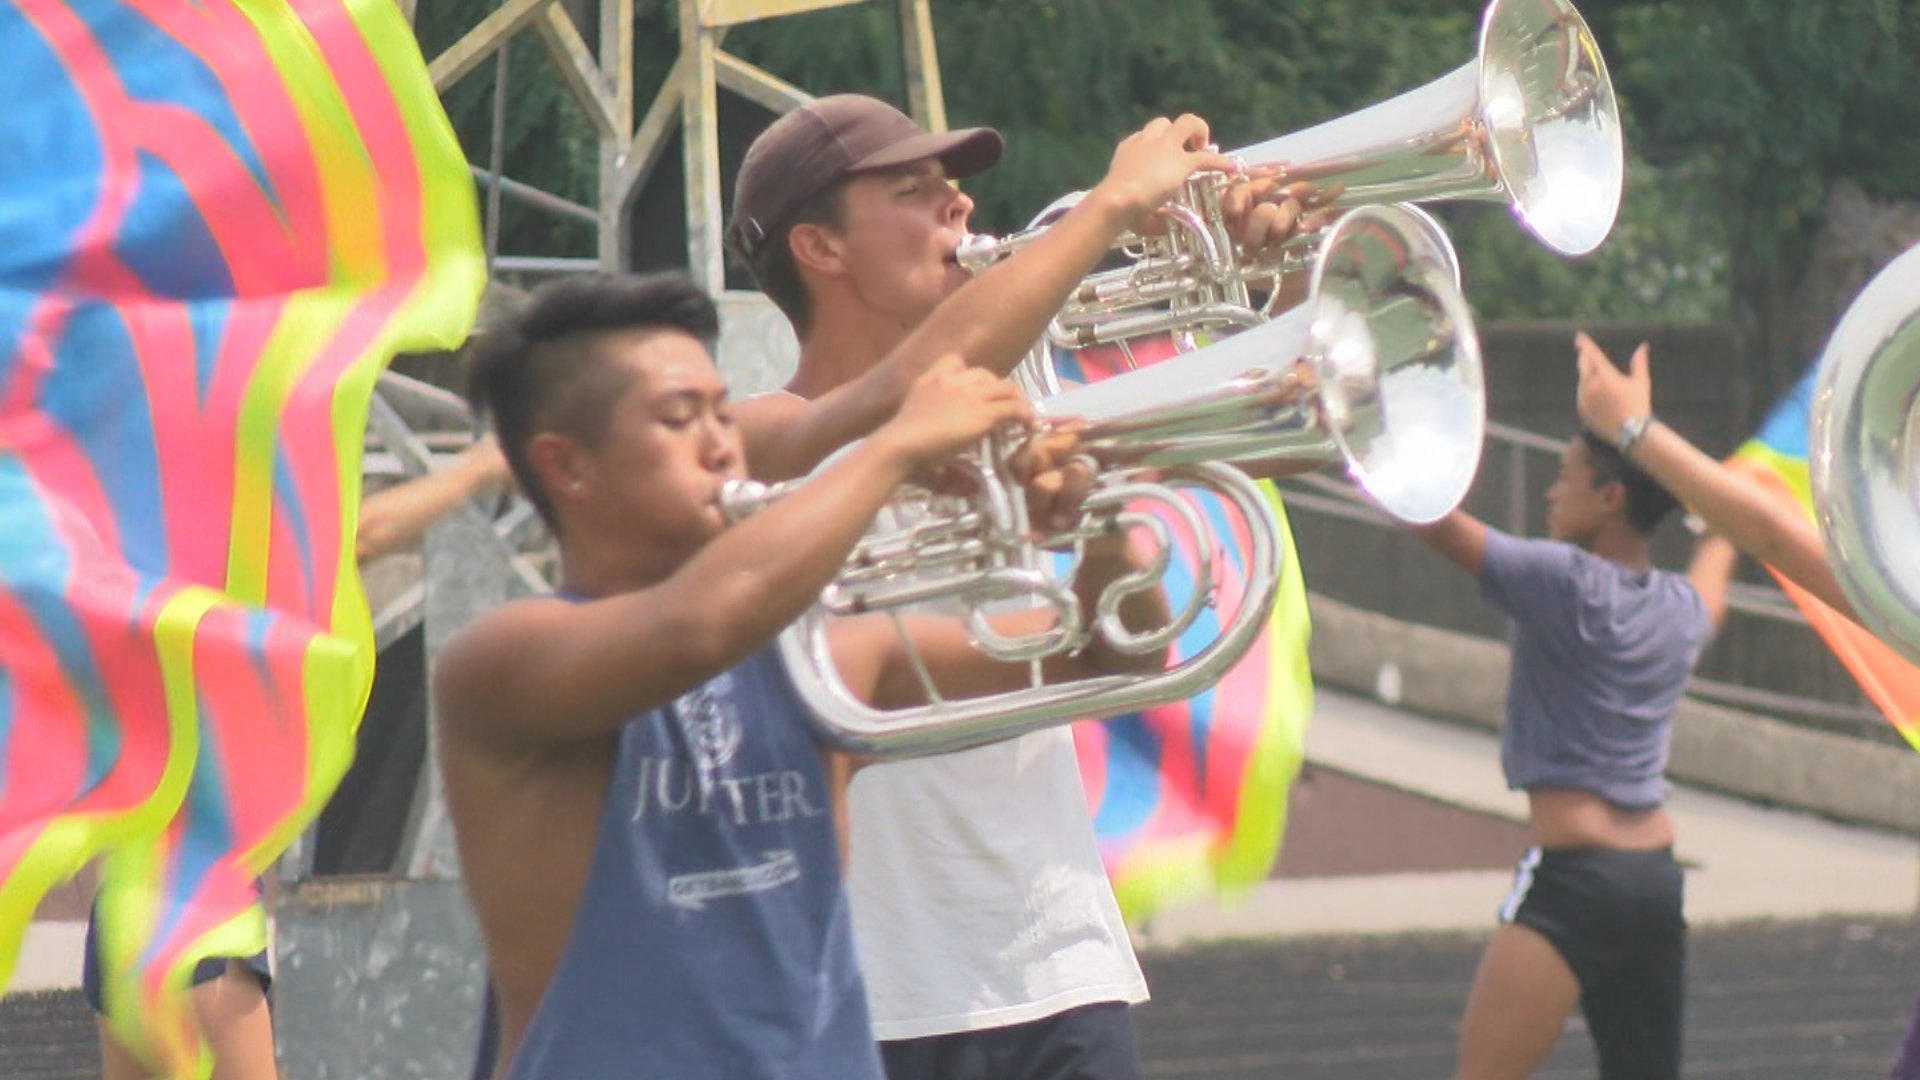 Drum corps world championship in Indy brings in 11M Indianapolis